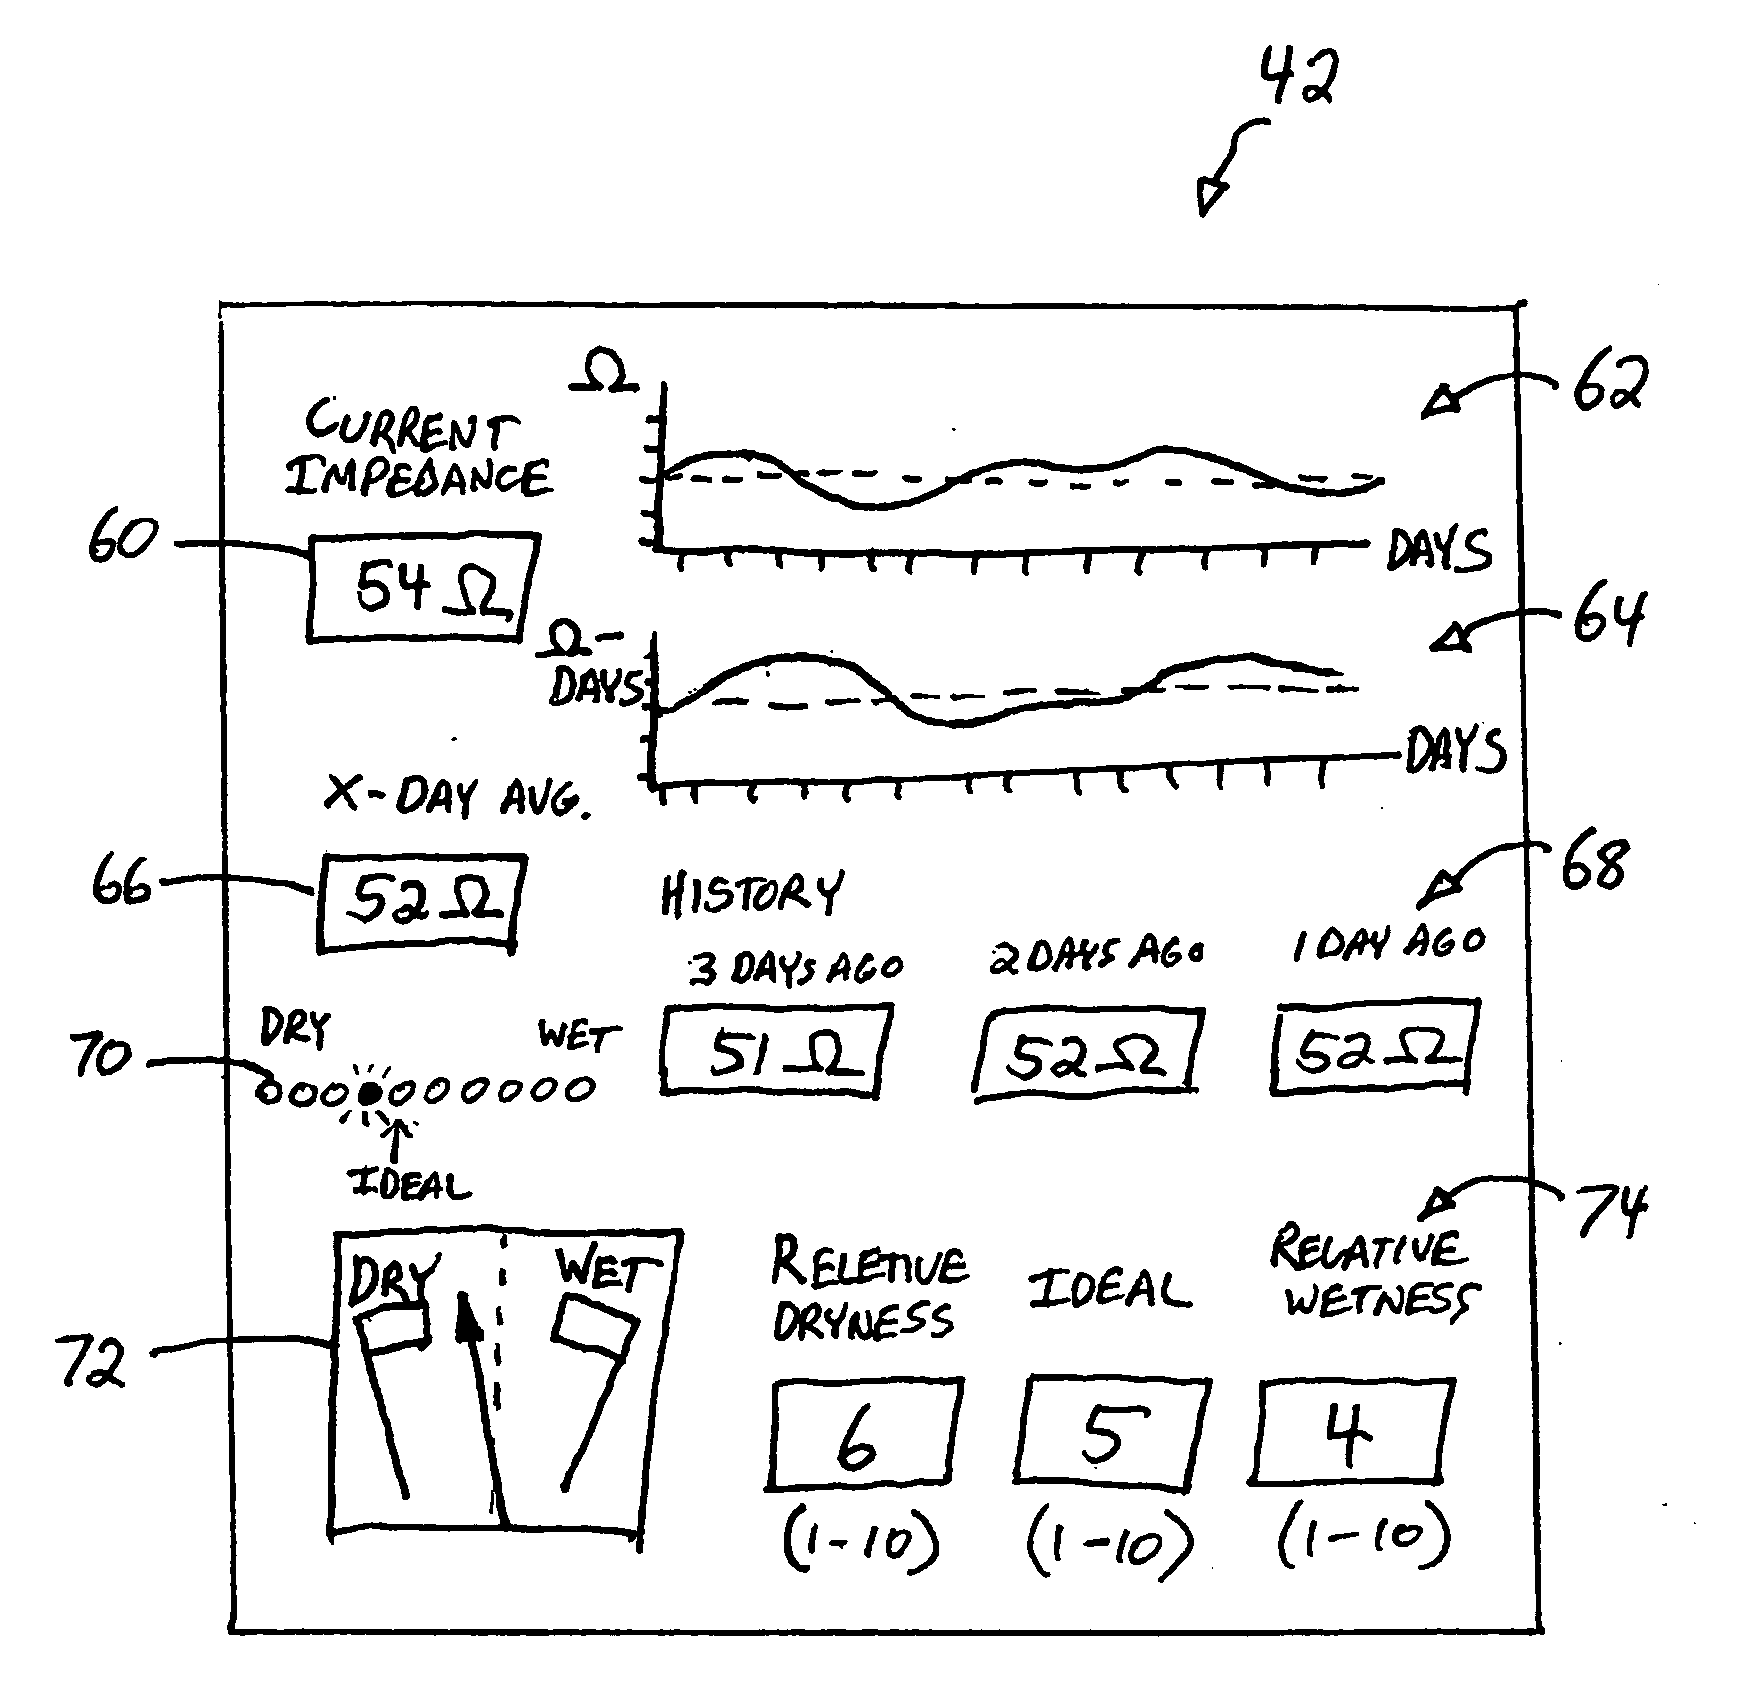 Edema monitoring system and method utilizing an implantable medical device